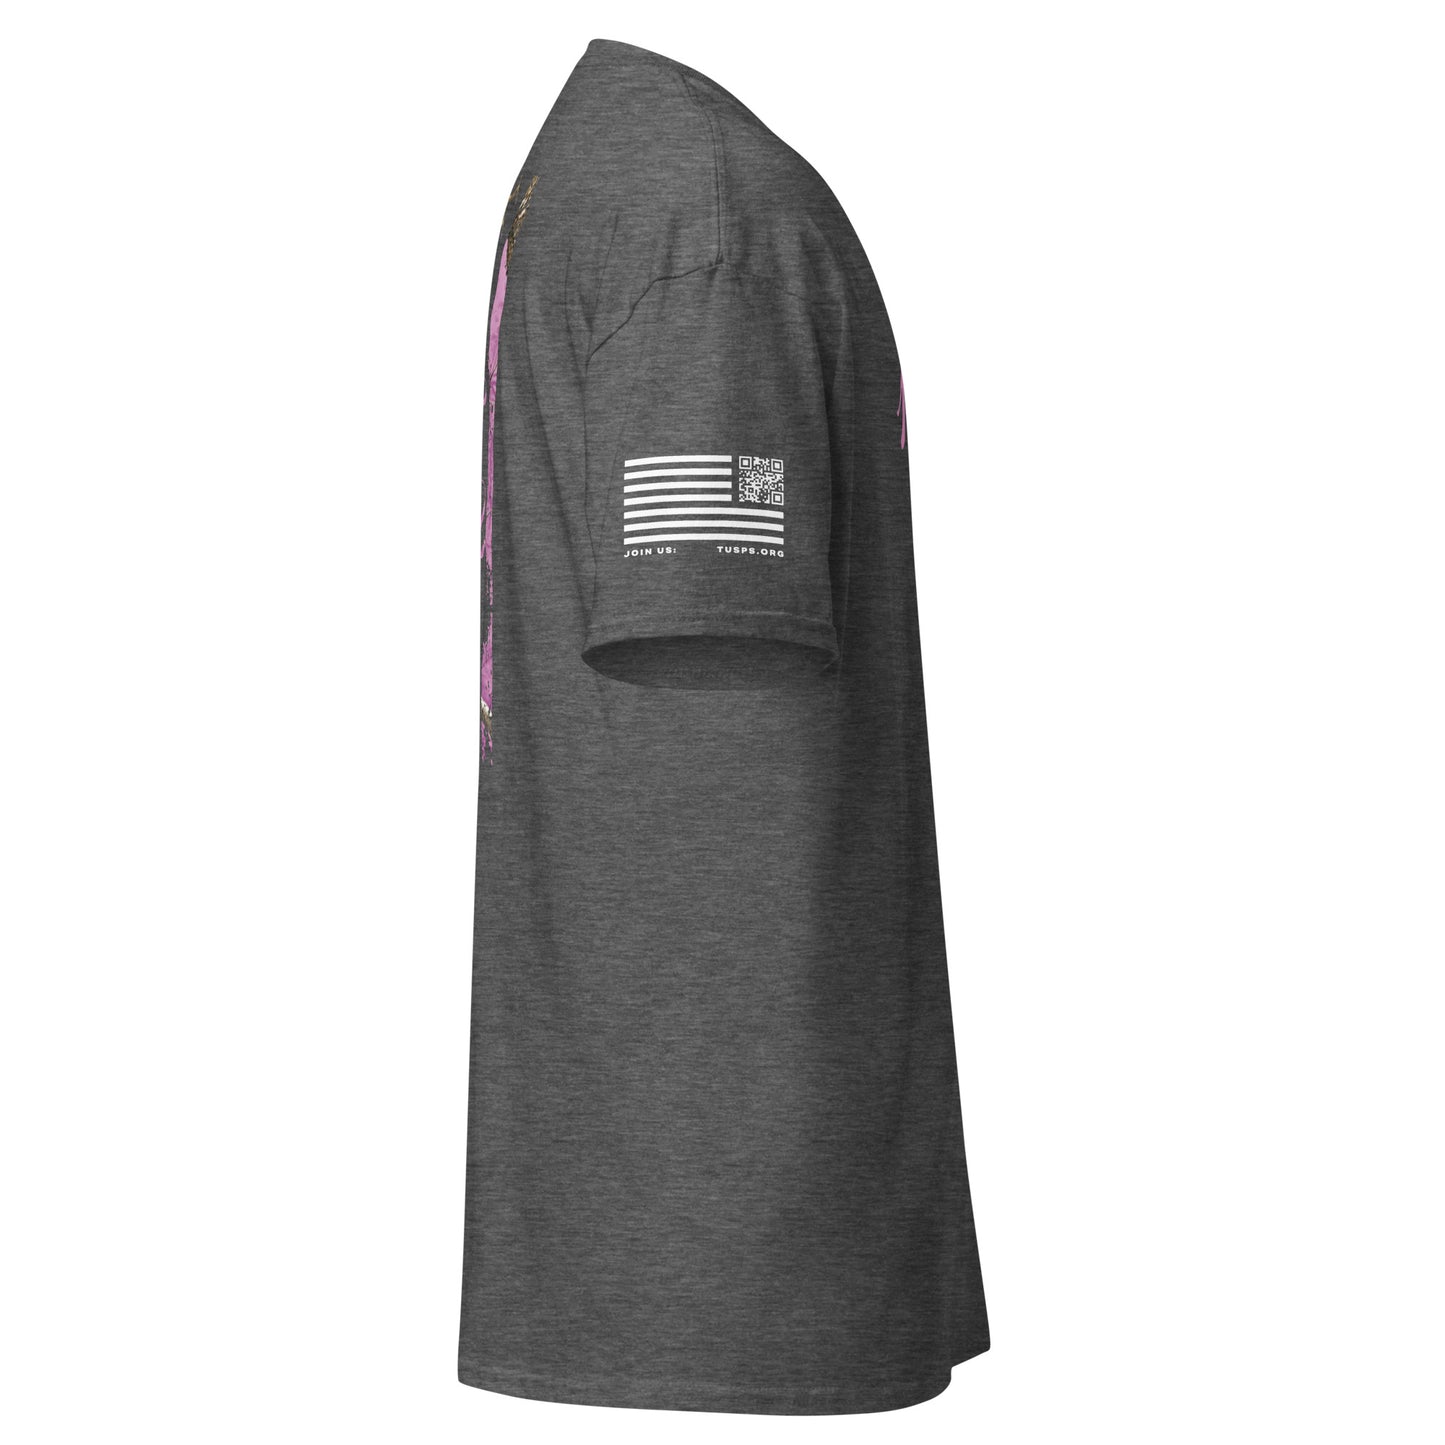 WE THE PEOPLE FLAG TEE - PINK CAMO EDITION